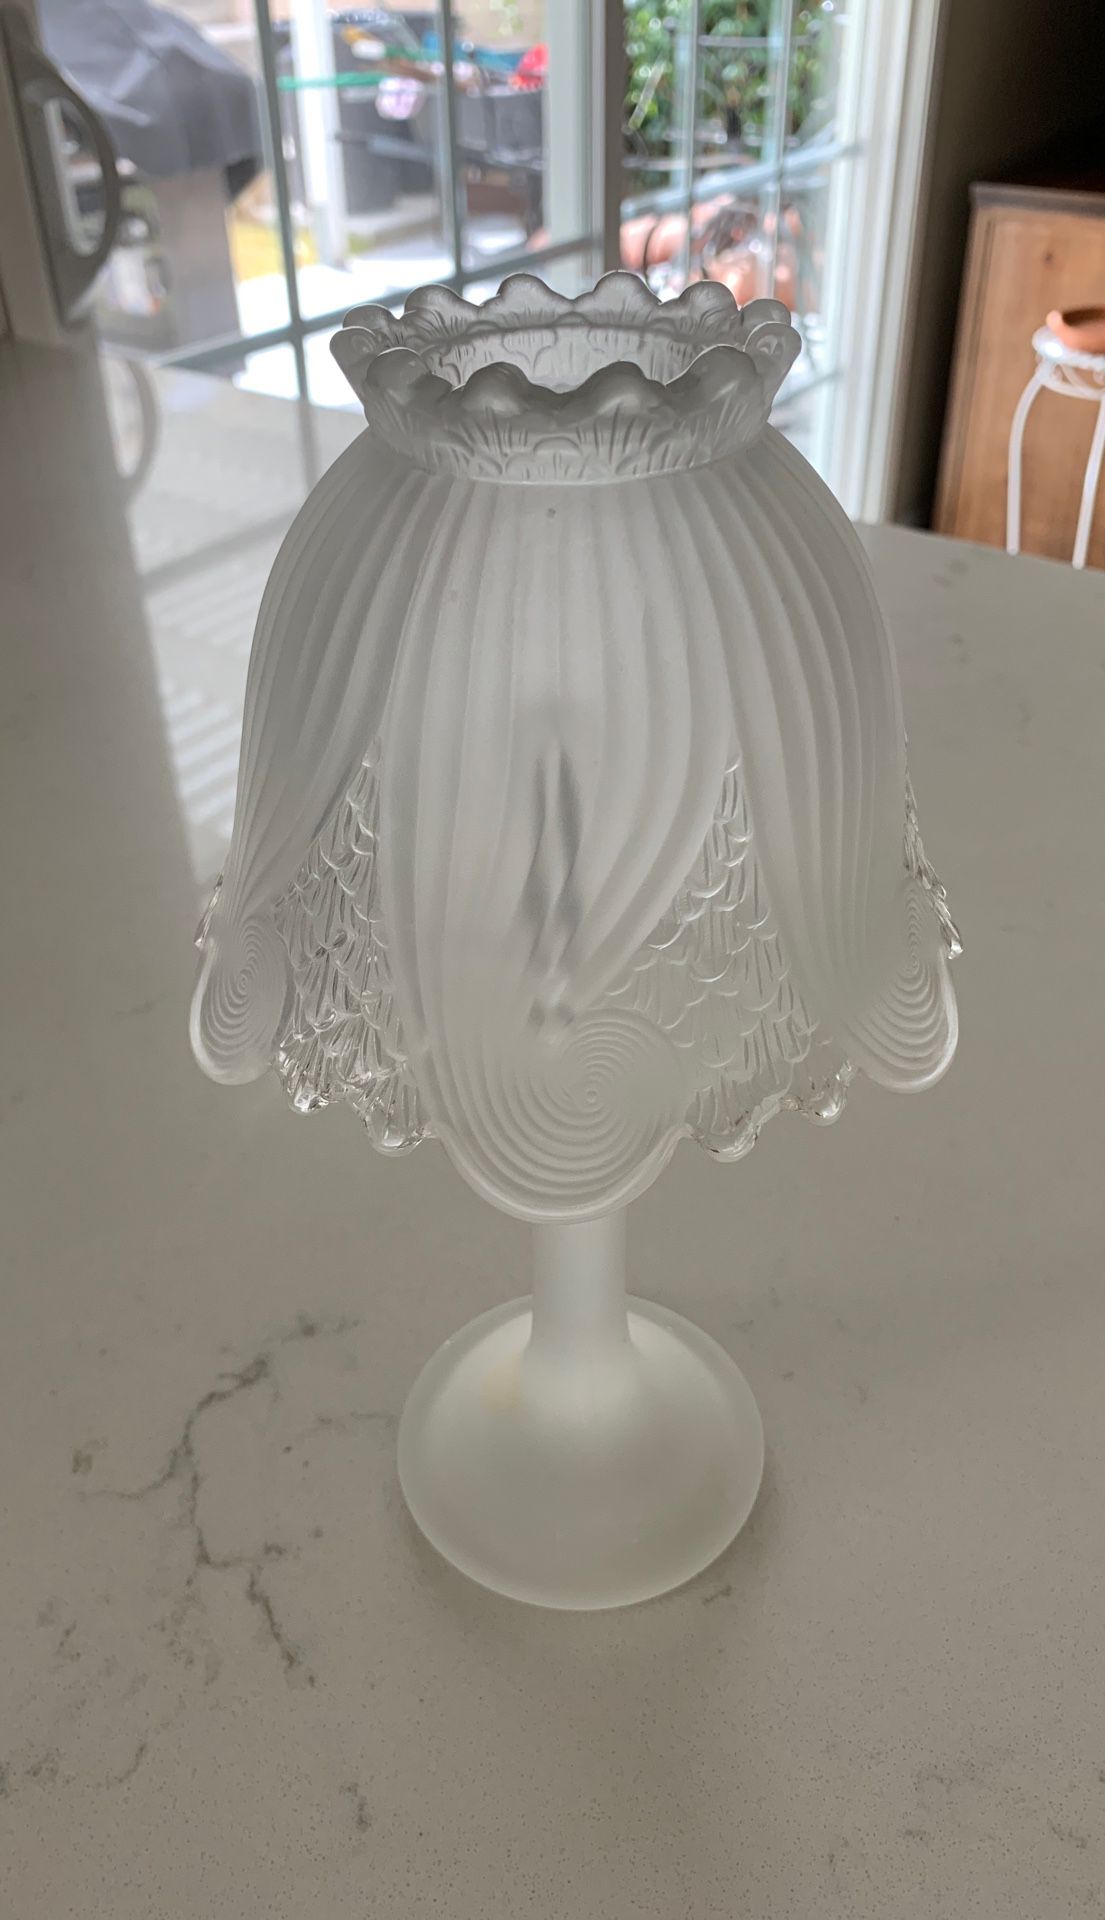 Party Lite White Frosted Glass Candle Lamp Tea Light Holder W Shade